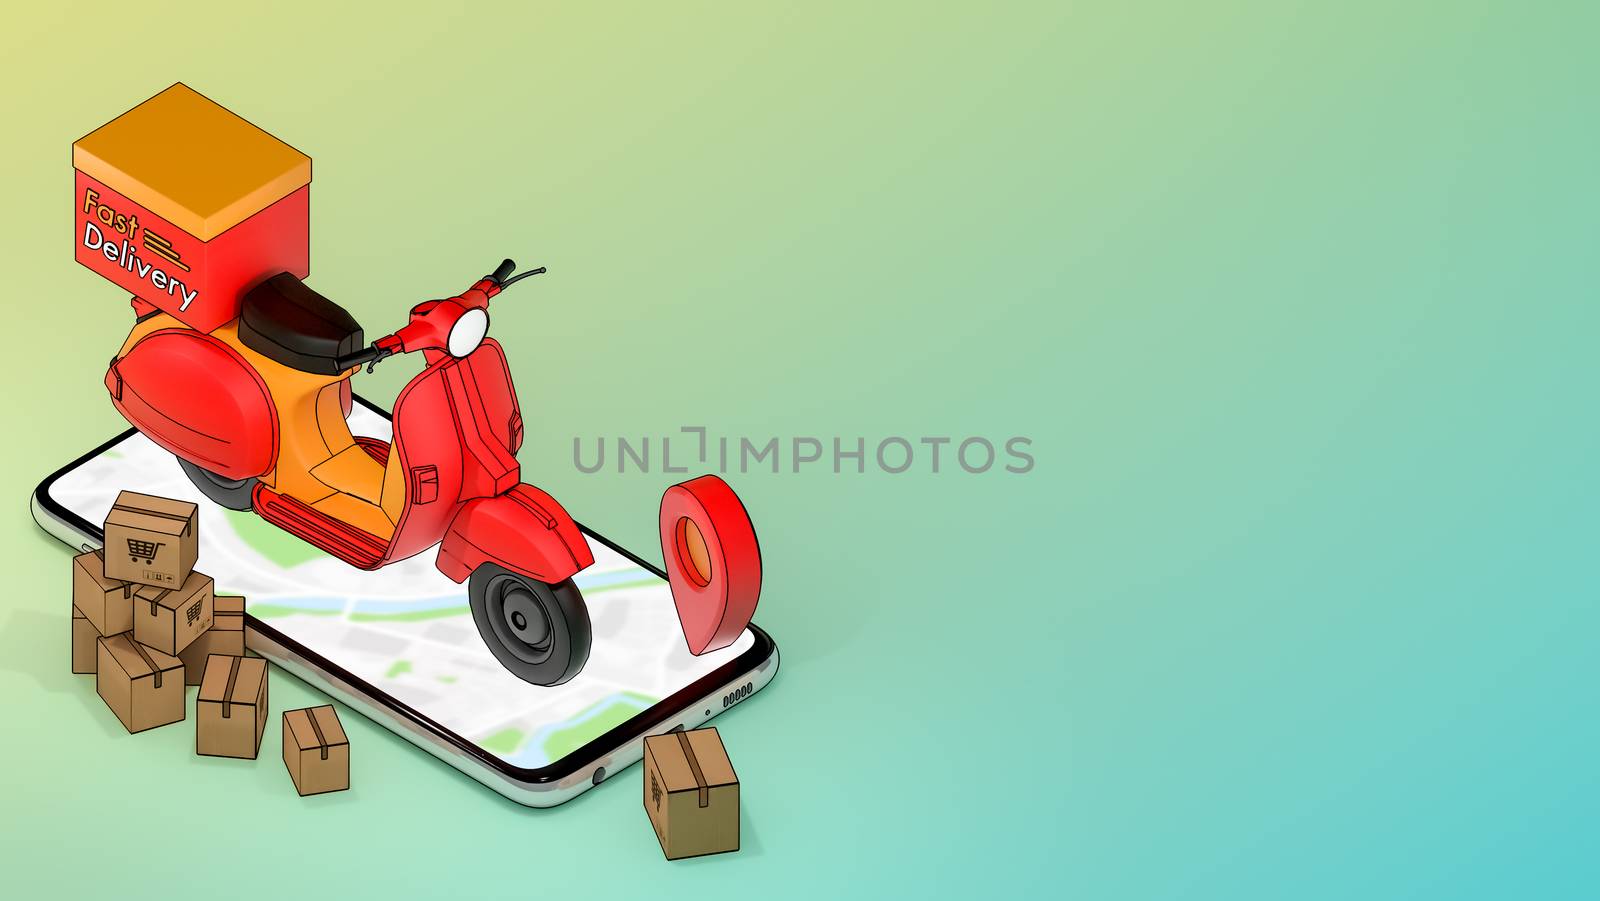 Mobile phone and Scooter with many paper box and red pin pointers.,Concept of fast delivery service and Shopping online.,3d illustration with object clipping path.